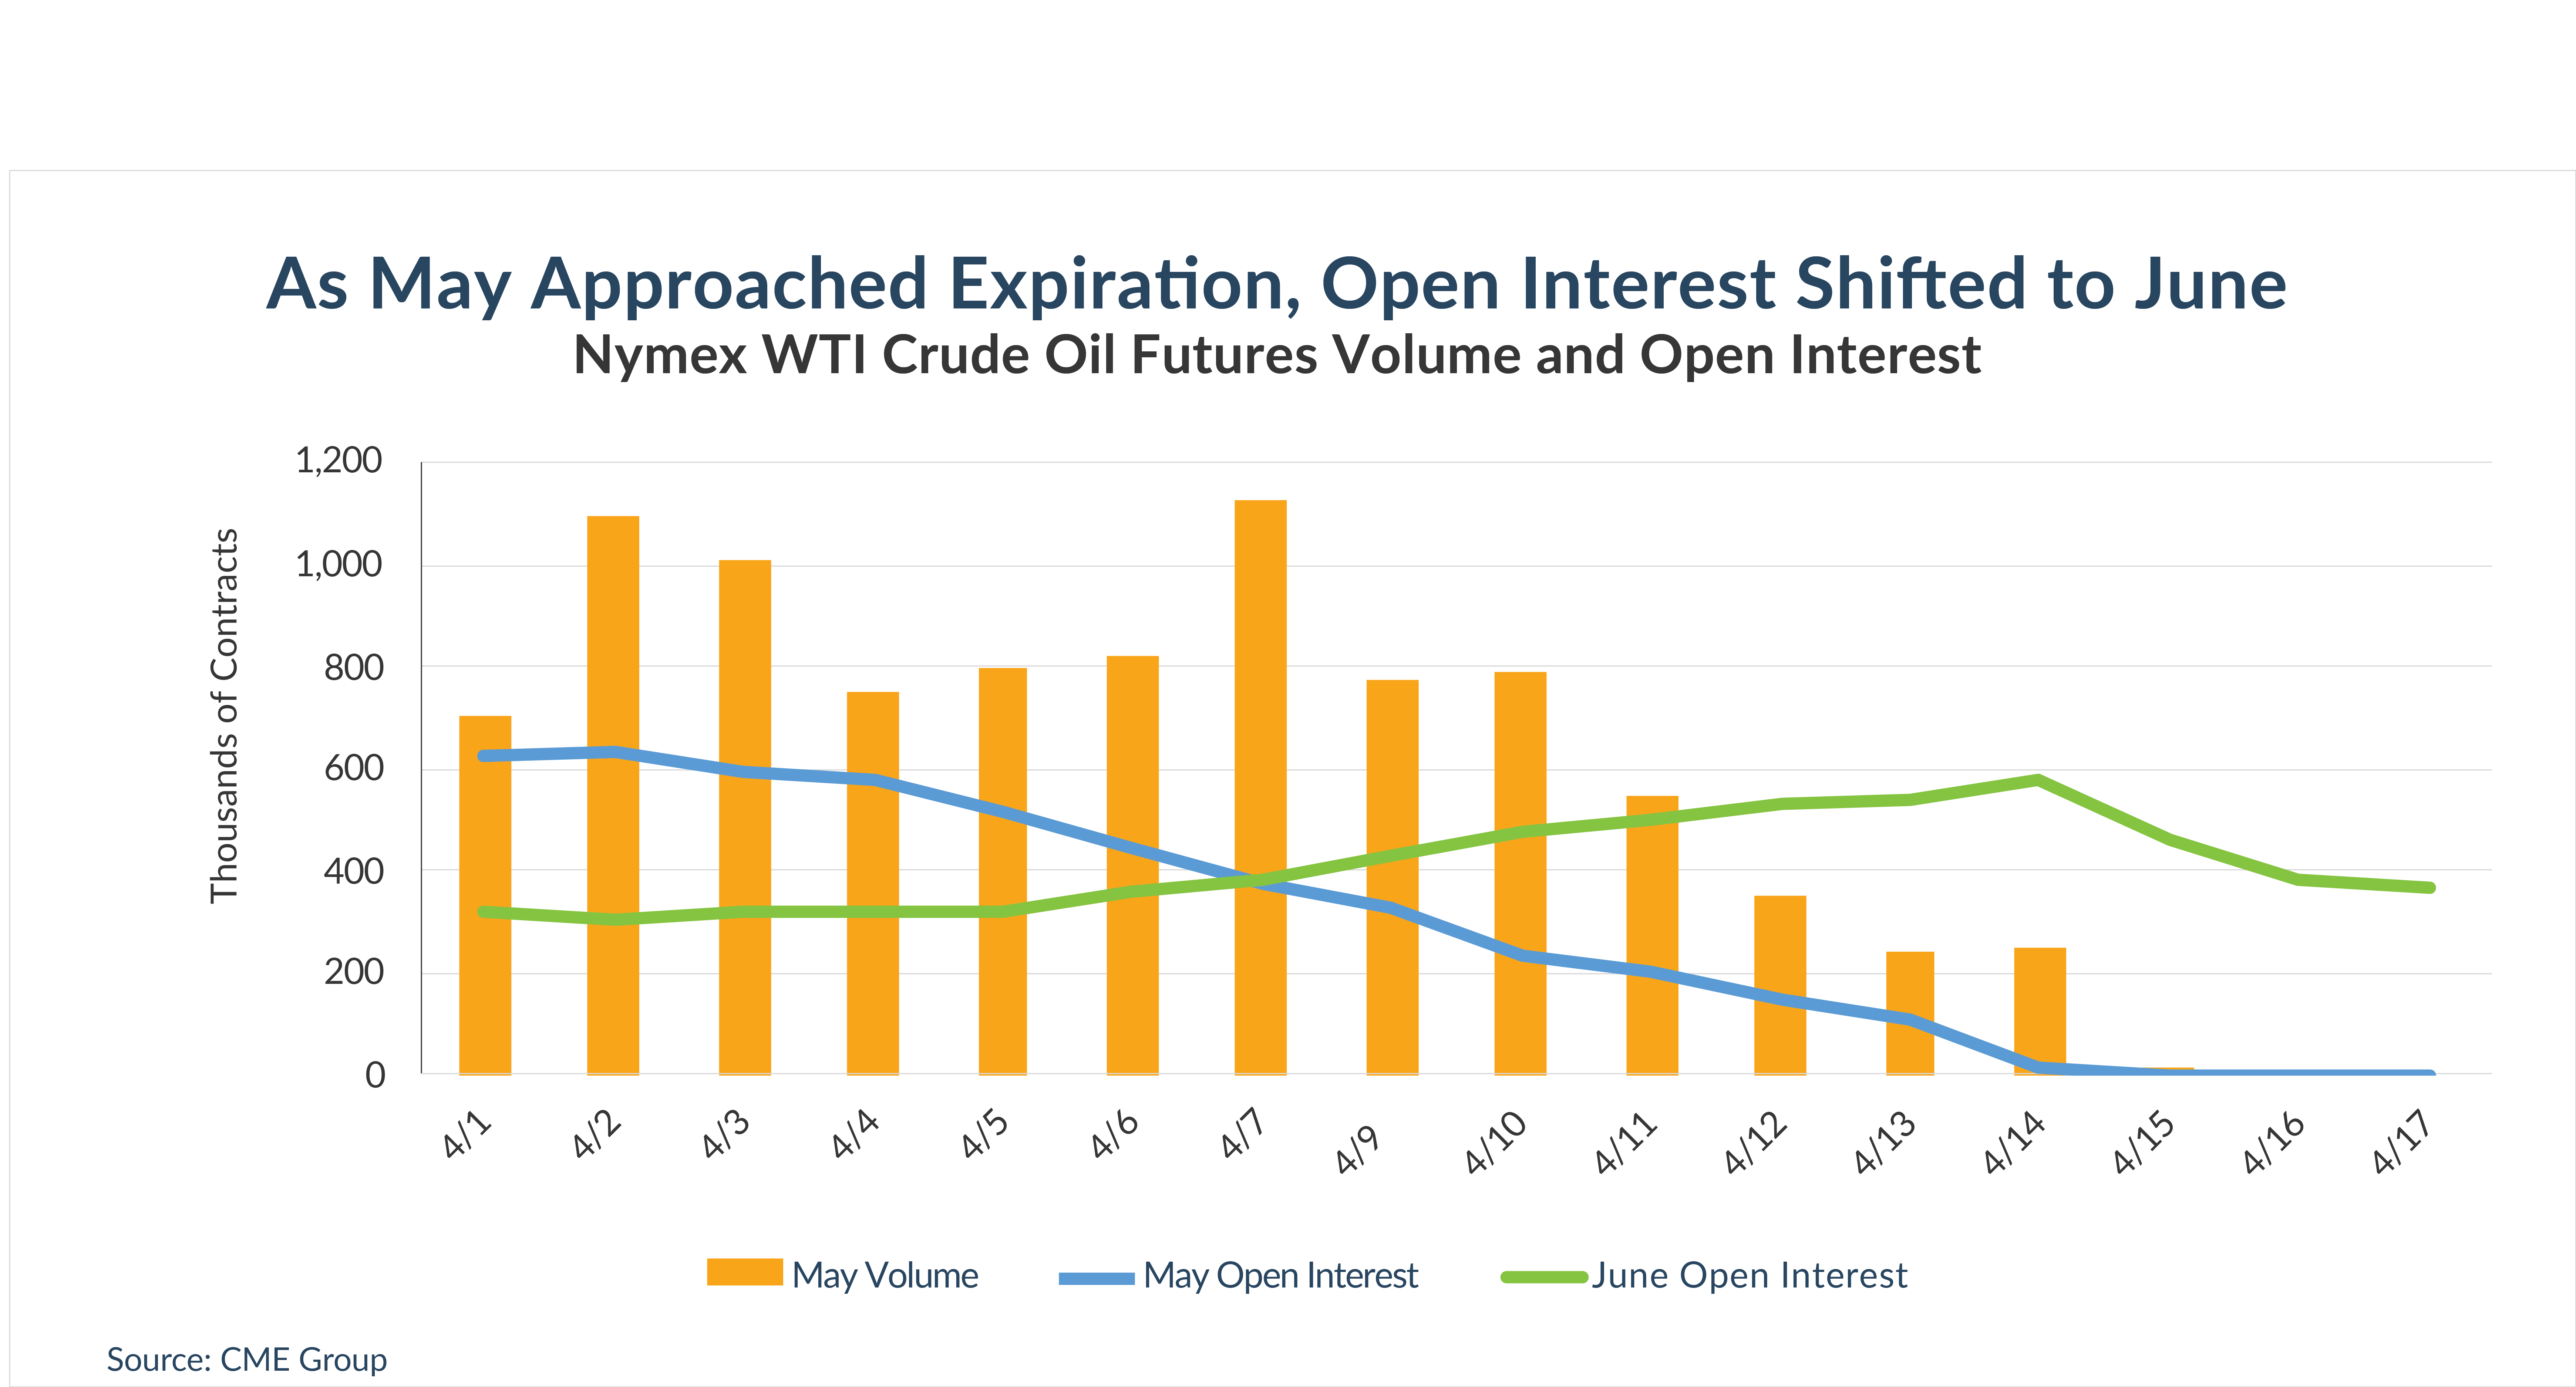 Open Interest Shifted to June